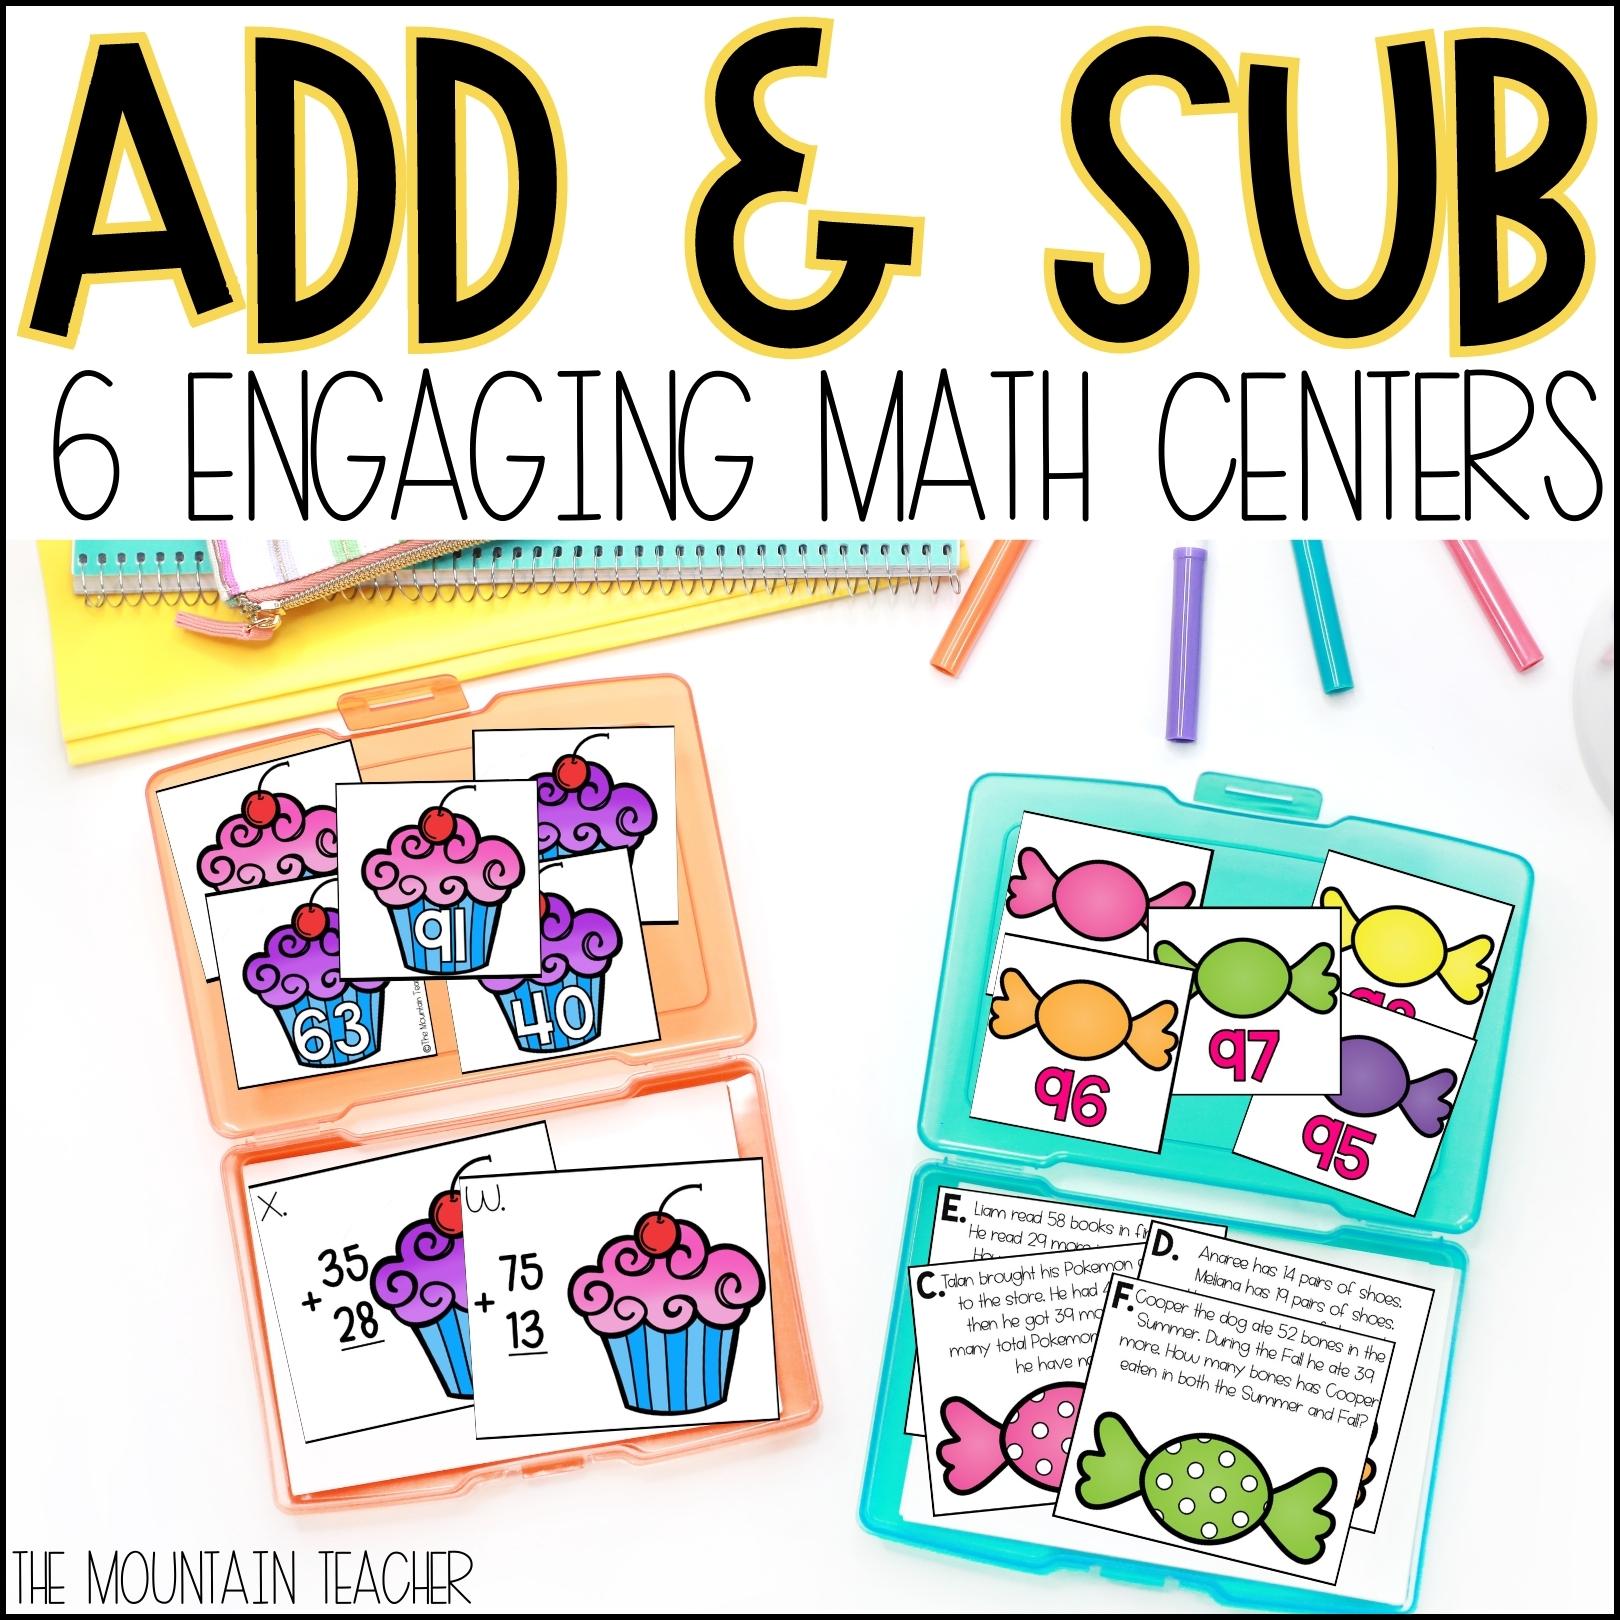 subtraction with regrouping worksheets for 2nd grade